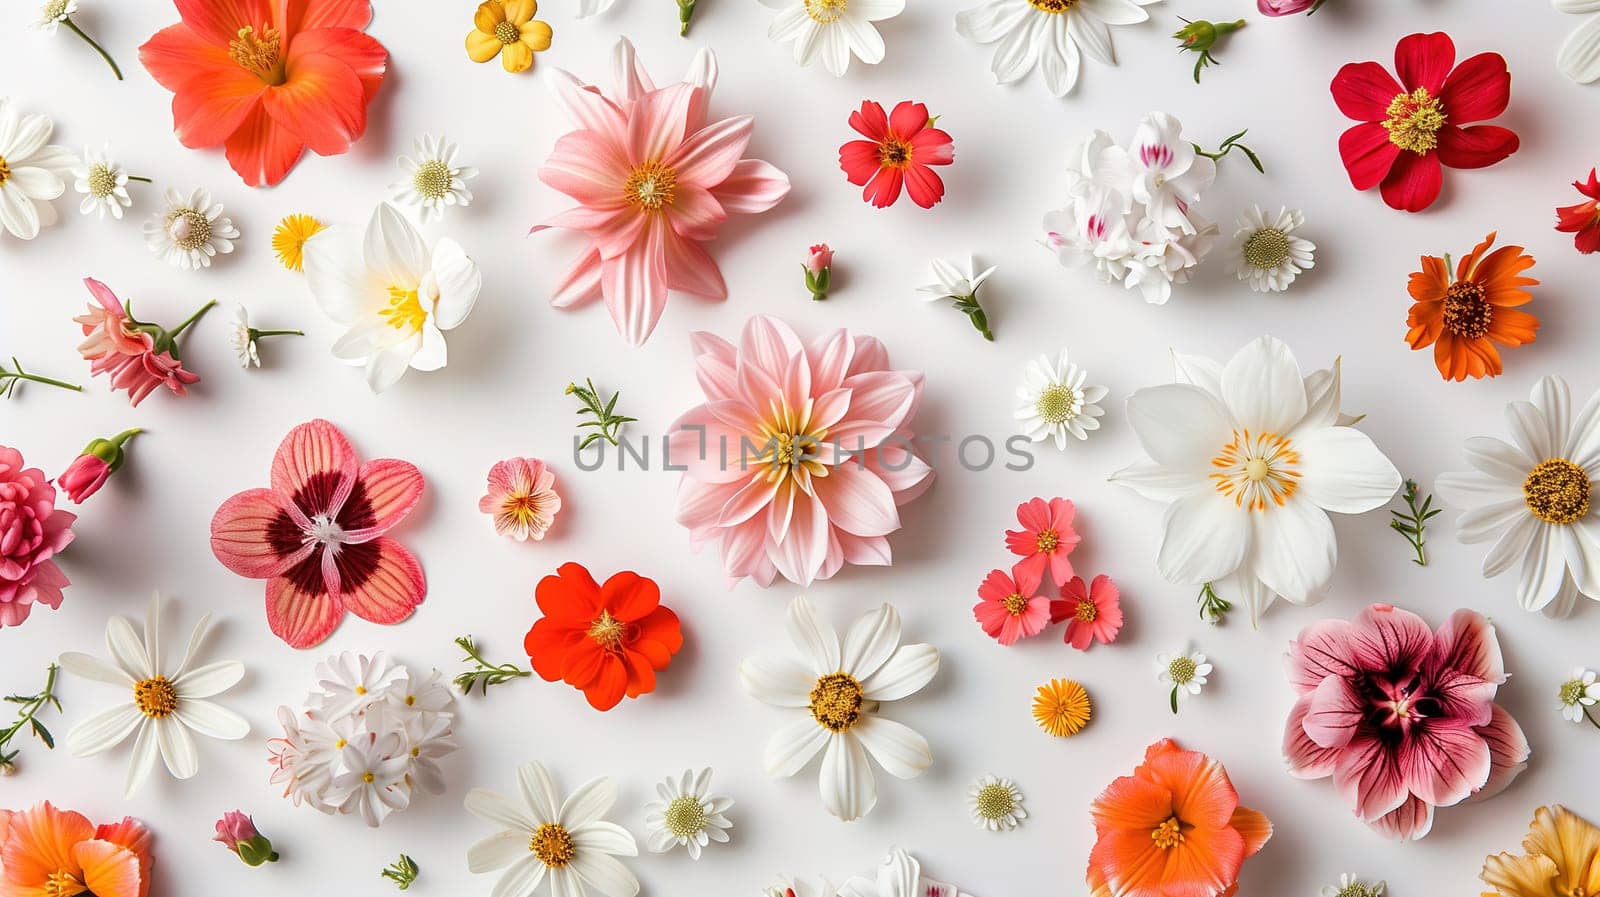 Assorted Colorful Flowers on White Surface by TRMK